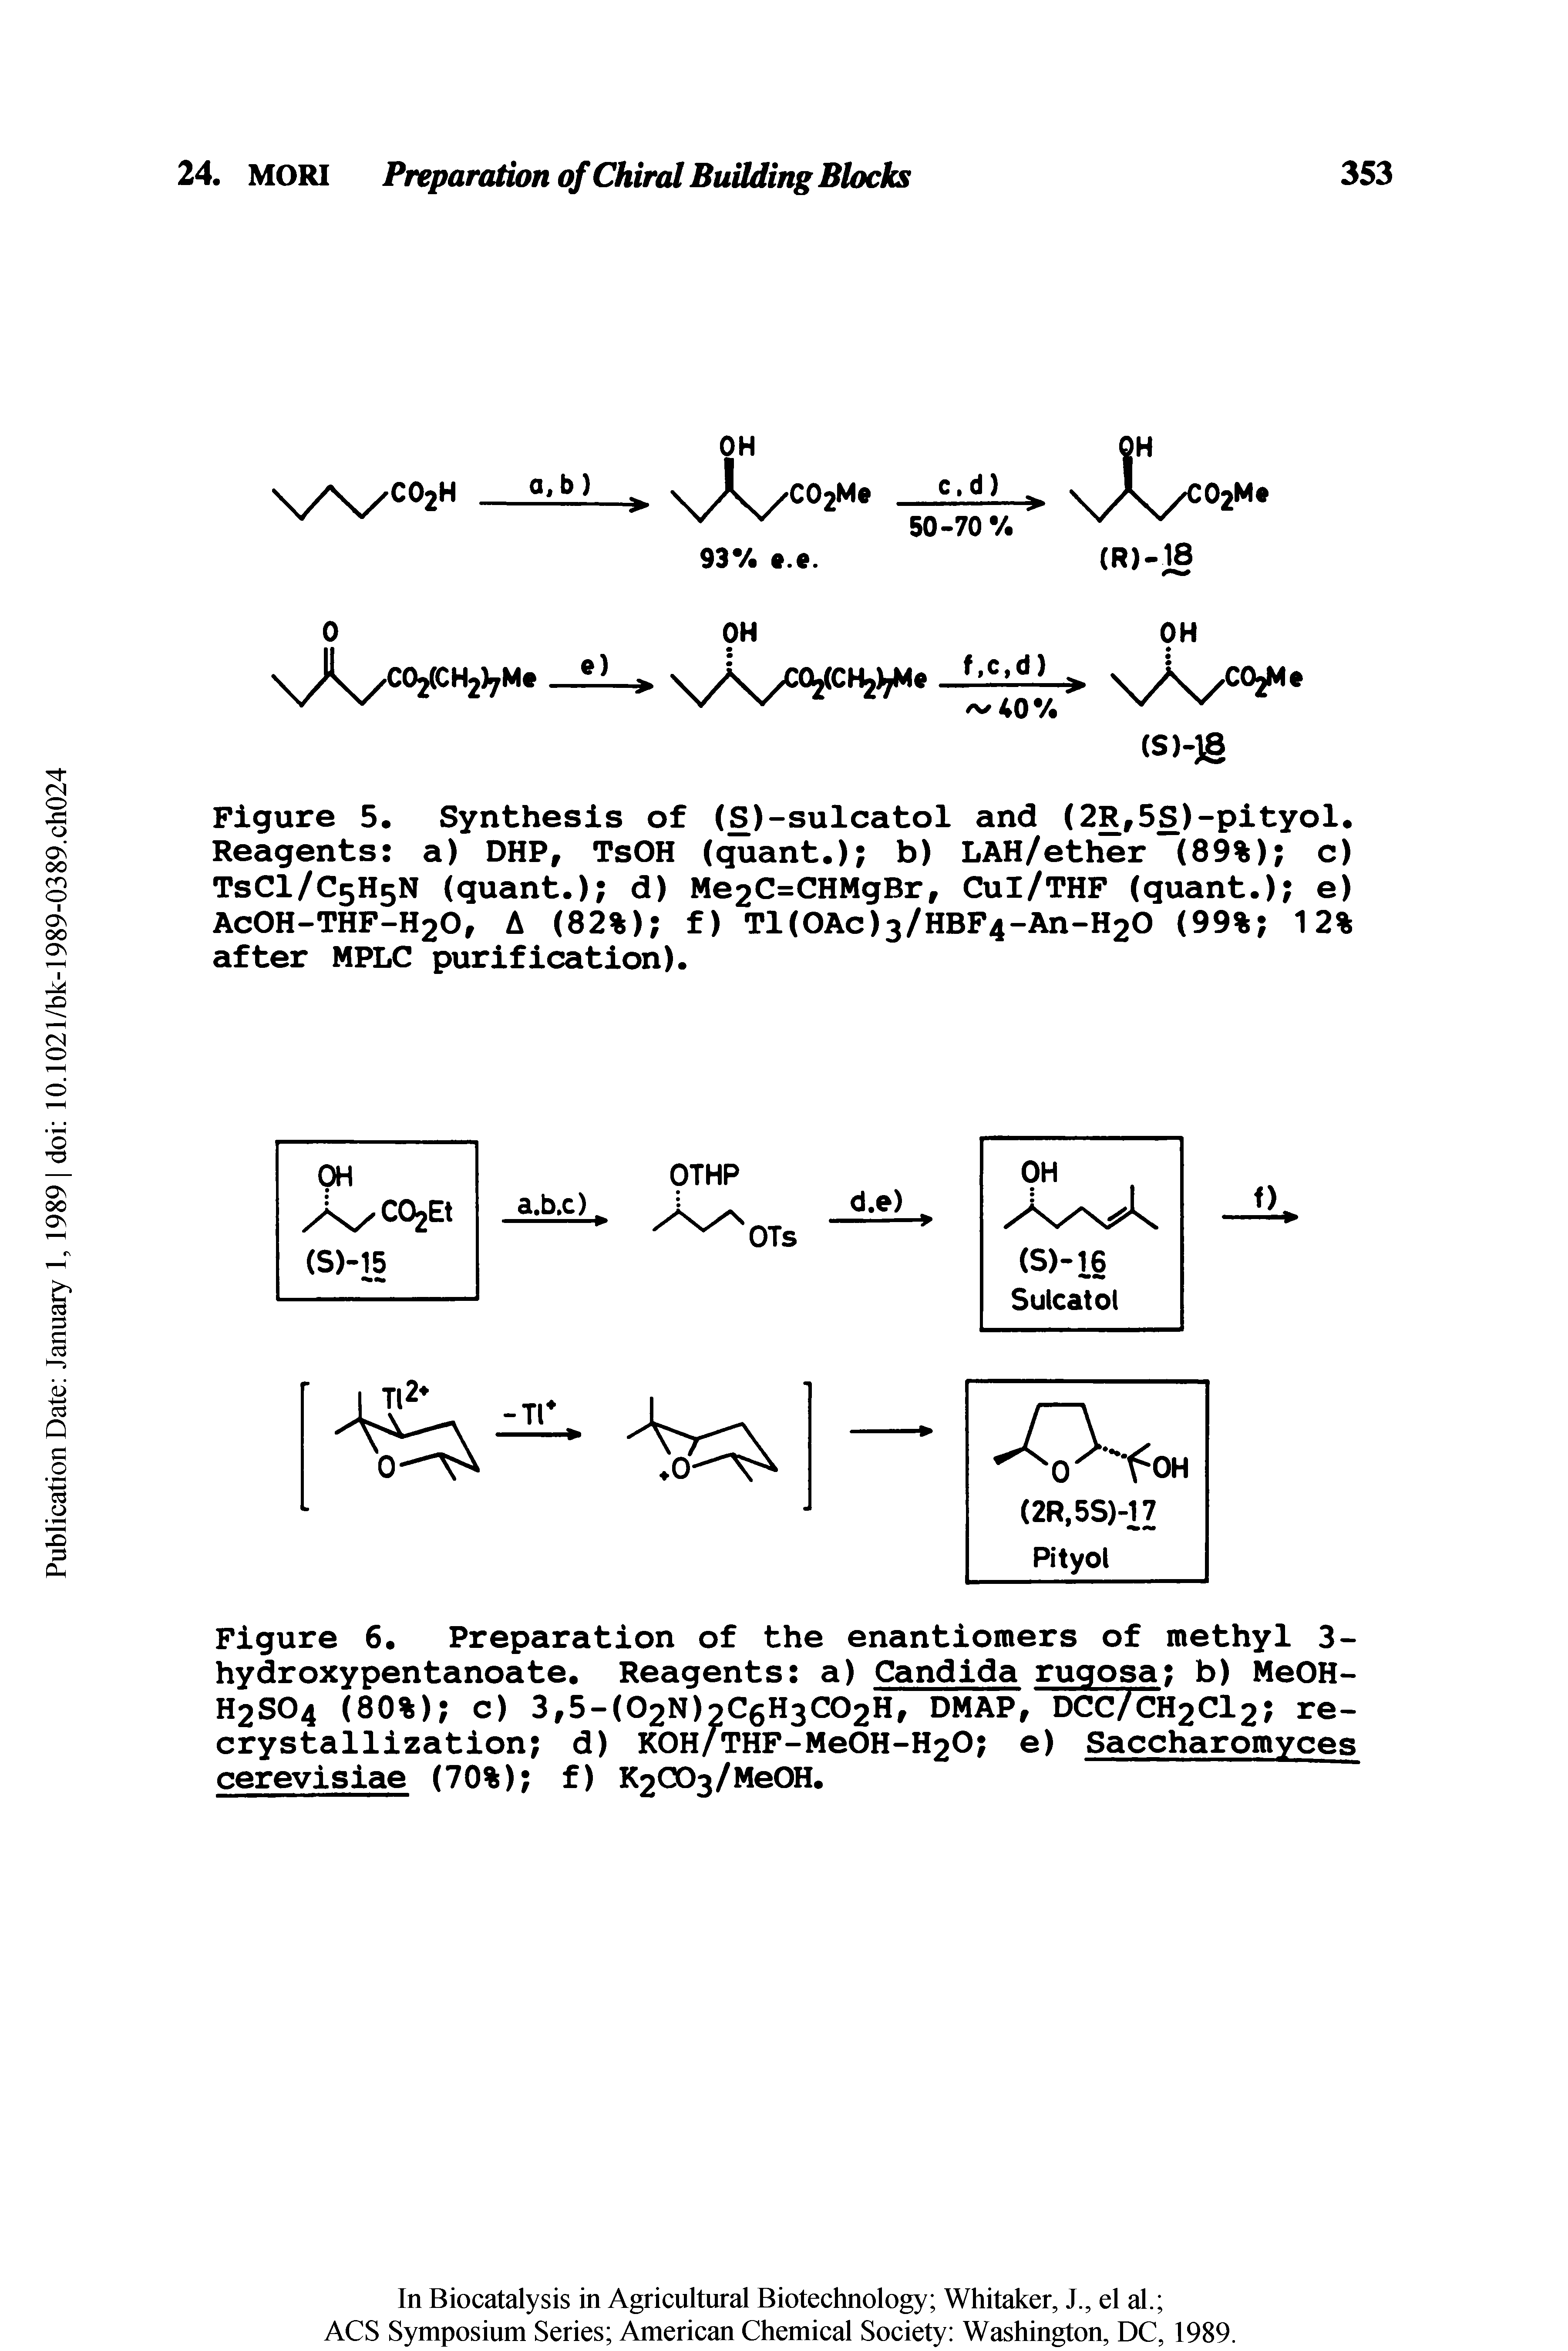 Figure 6. Preparation of the enantiomers of methyl 3-hydroxypentanoate. Reagents a) Candida rugosa b) MeOH-H2S04 (80%) c) 3,5-(02N) C6H3C02H, DMAP, DCC/CH2C12 recrystallization d) K0H/THF-Me0H-H20 e) Saccharomyces cerevisiae (70%) f) K2C03/Me0H.